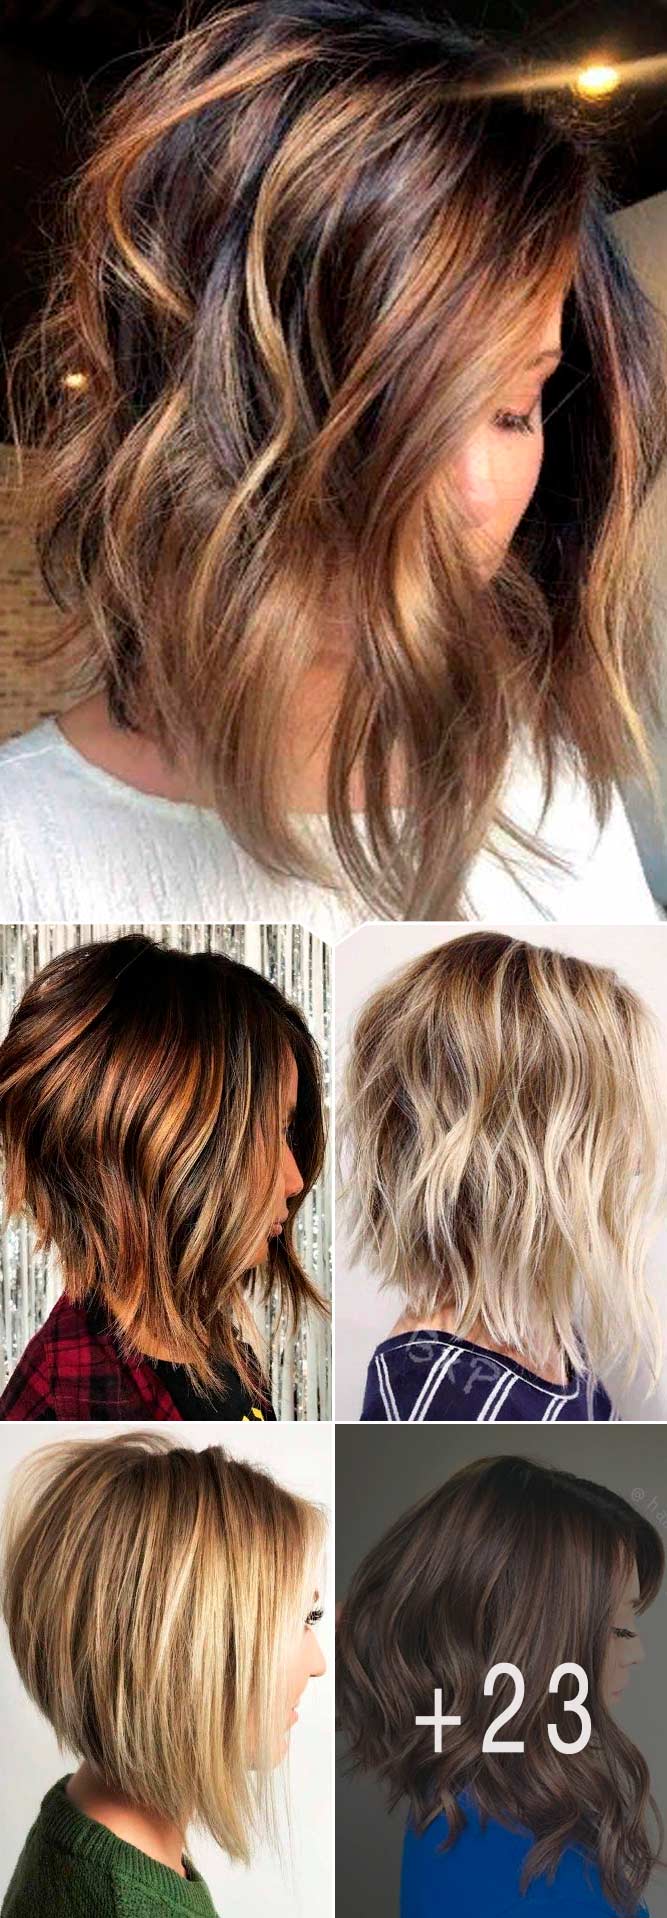 80+ Inverted Bob Ideas to Keep Up With Trends 